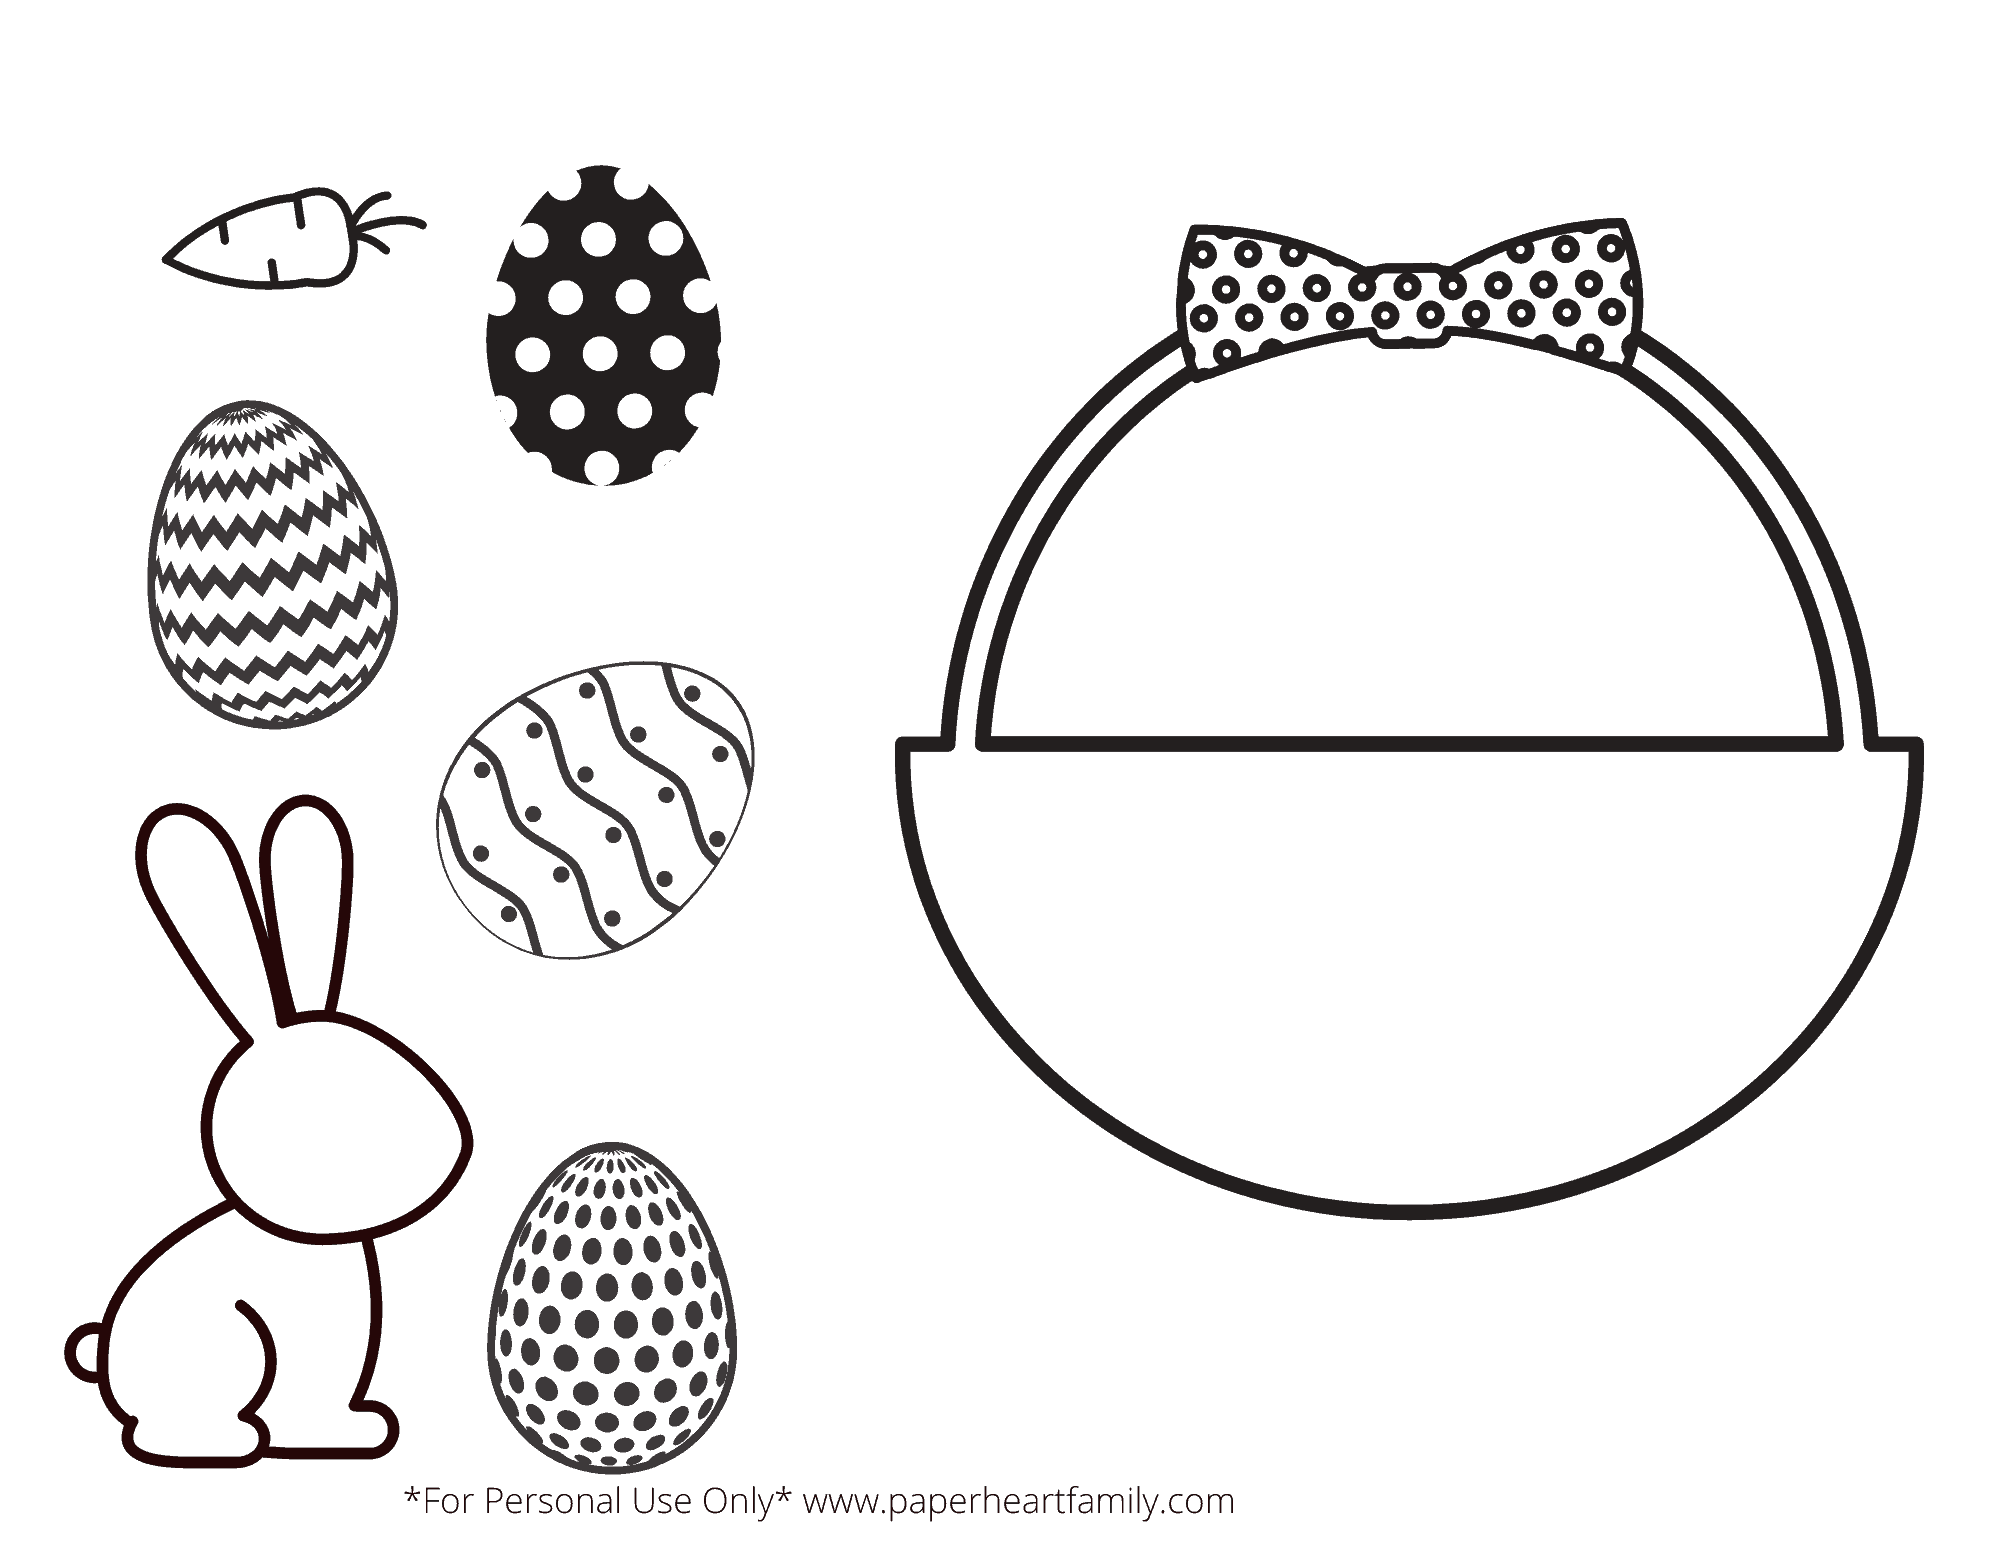 https://www.paperheartfamily.com/wp-content/uploads/2020/03/Printable-Easter-Craft-Template.png.webp